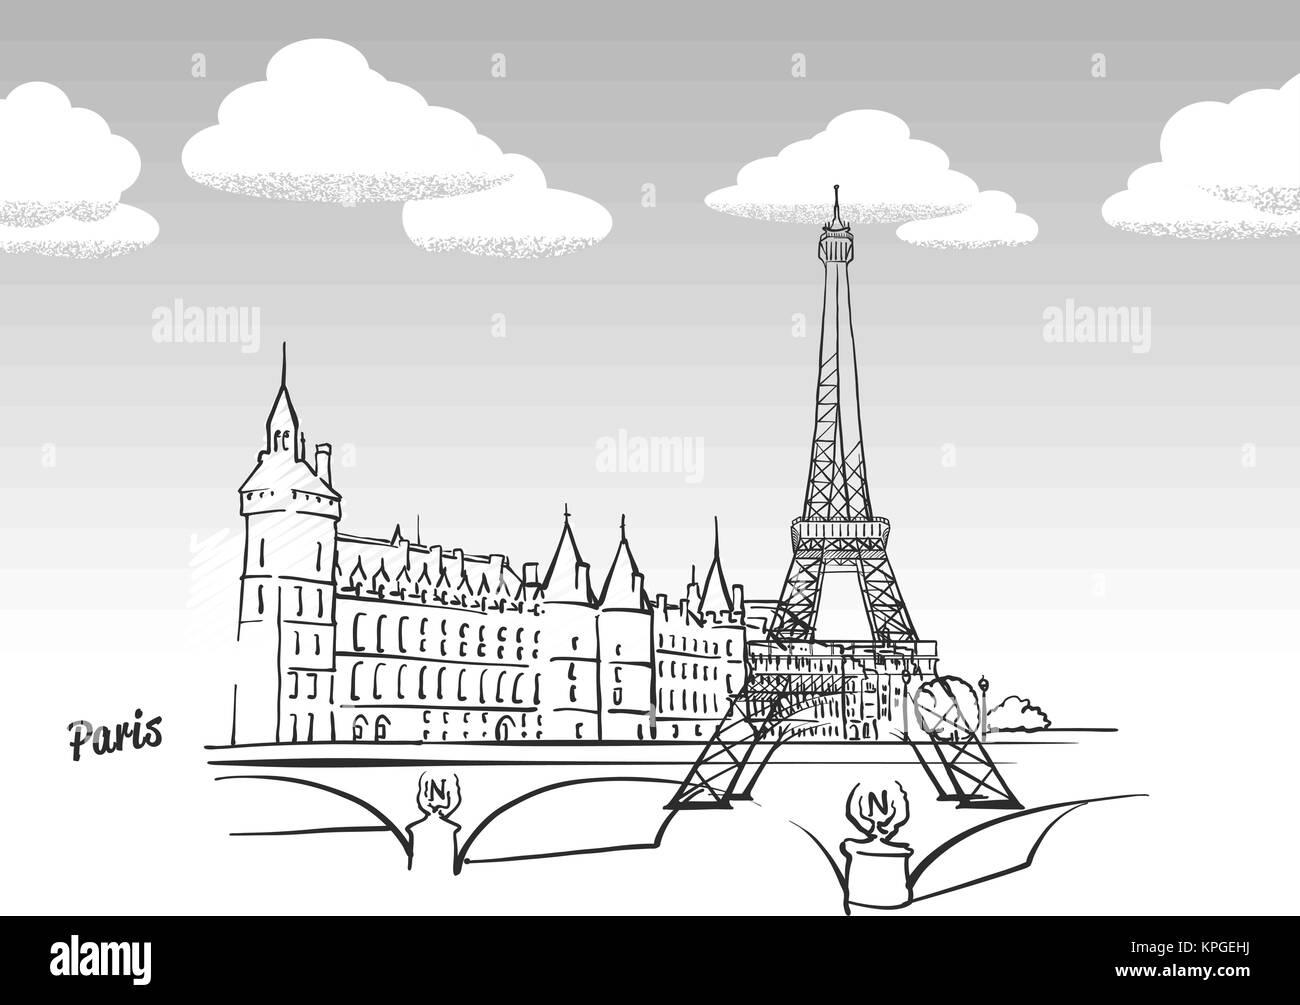 4944 French House Sketch Images Stock Photos  Vectors  Shutterstock